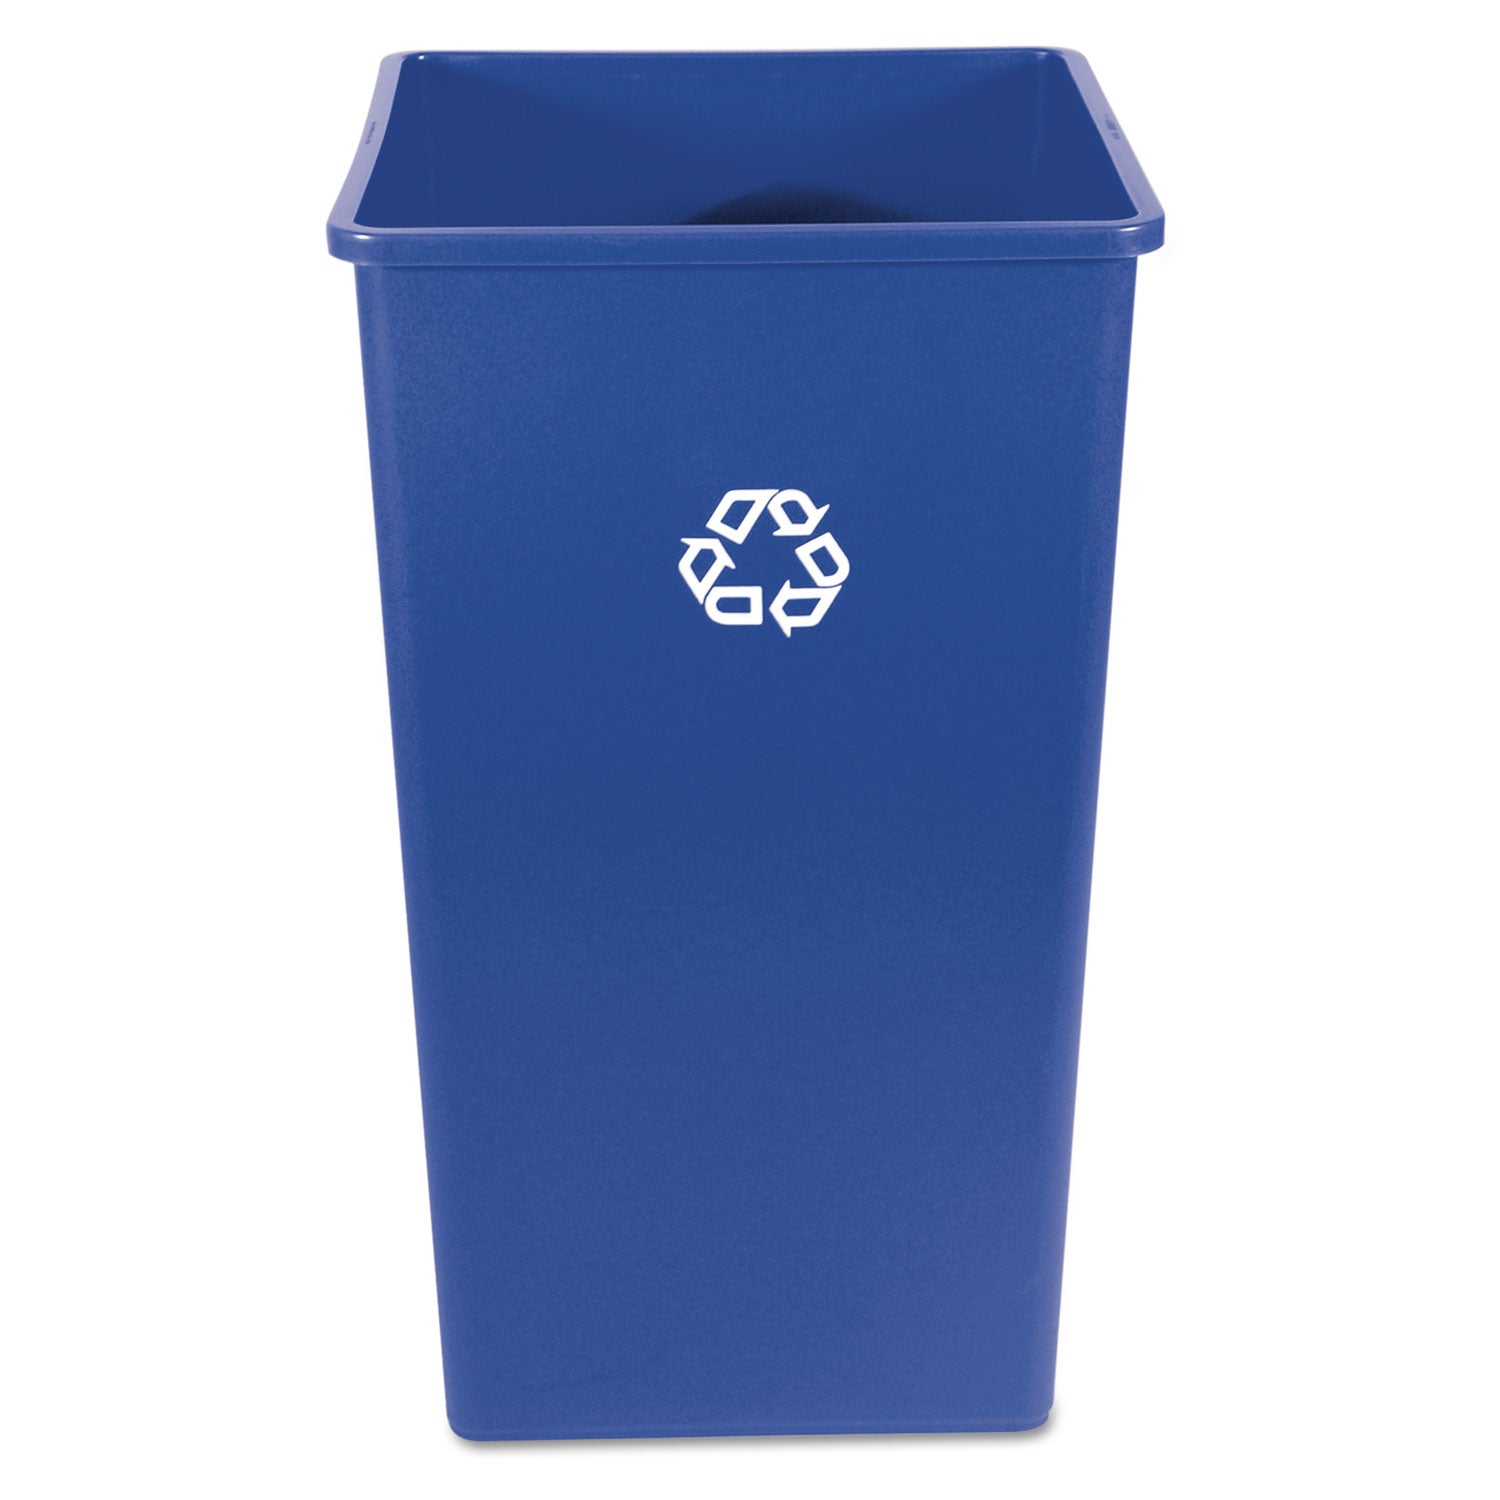 Square Recycling Container, 50 gal, Plastic, Blue - 